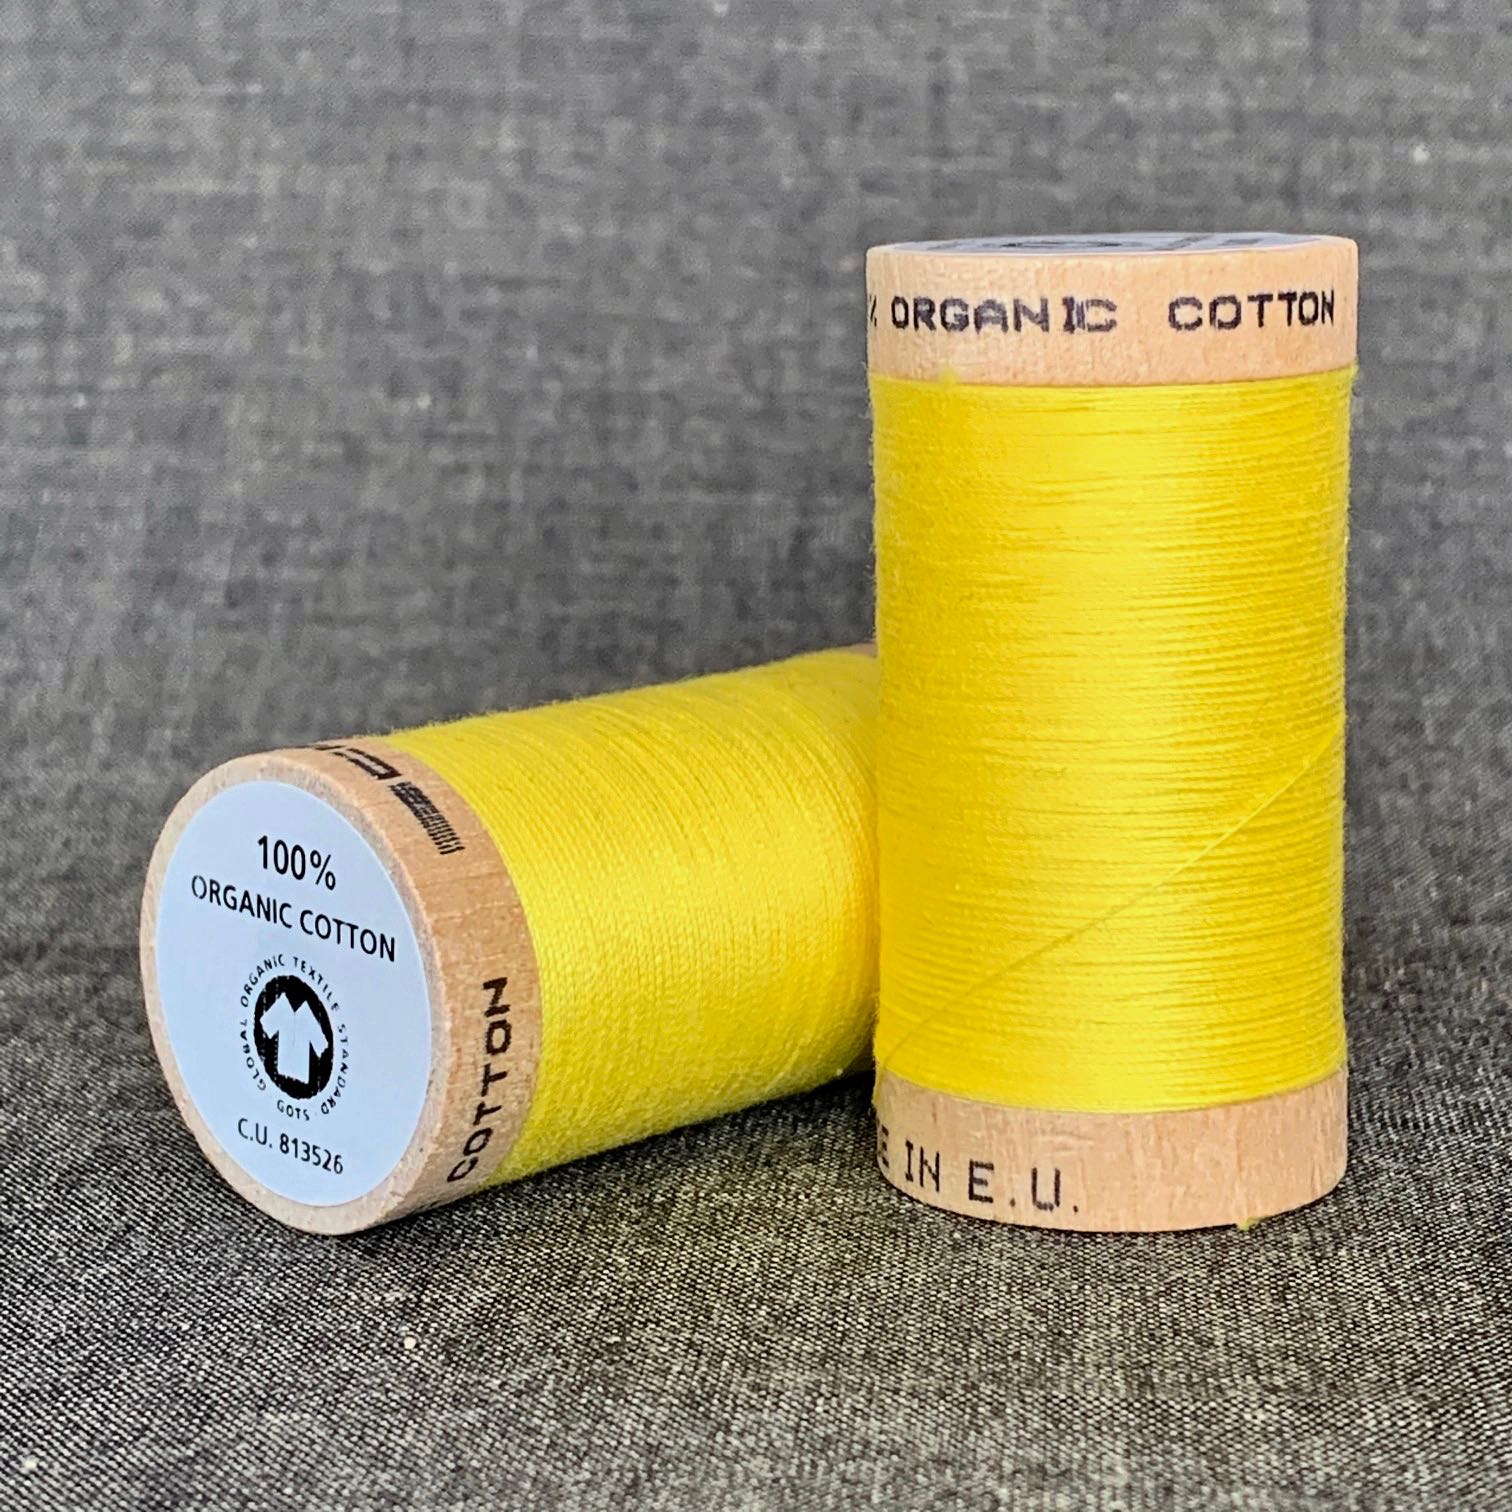 Scanfil Organic Cotton Sewing Thread Bright Yellow